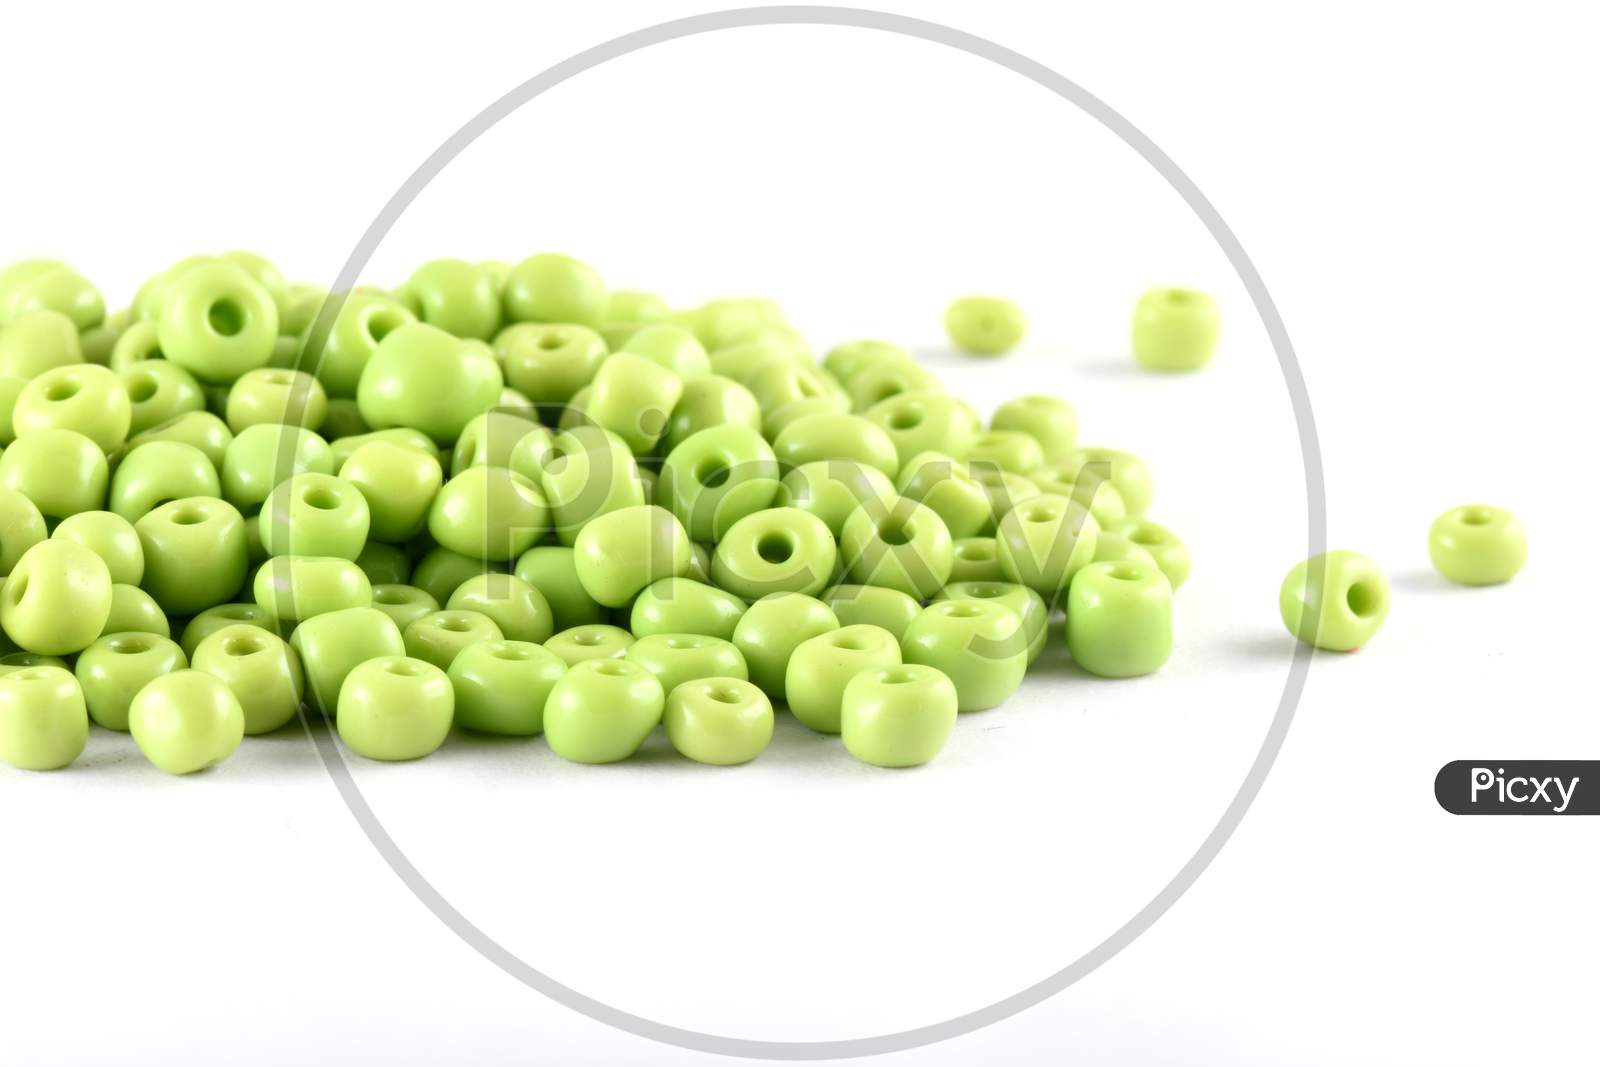 Close Up Of Light Green Beads On The White Background. Background Or Texture Of Beads. Macro,It Is Used In Finishing Fashion Clothes. Make Bead Necklace Or String Of Beads For Woman Of Fashion.